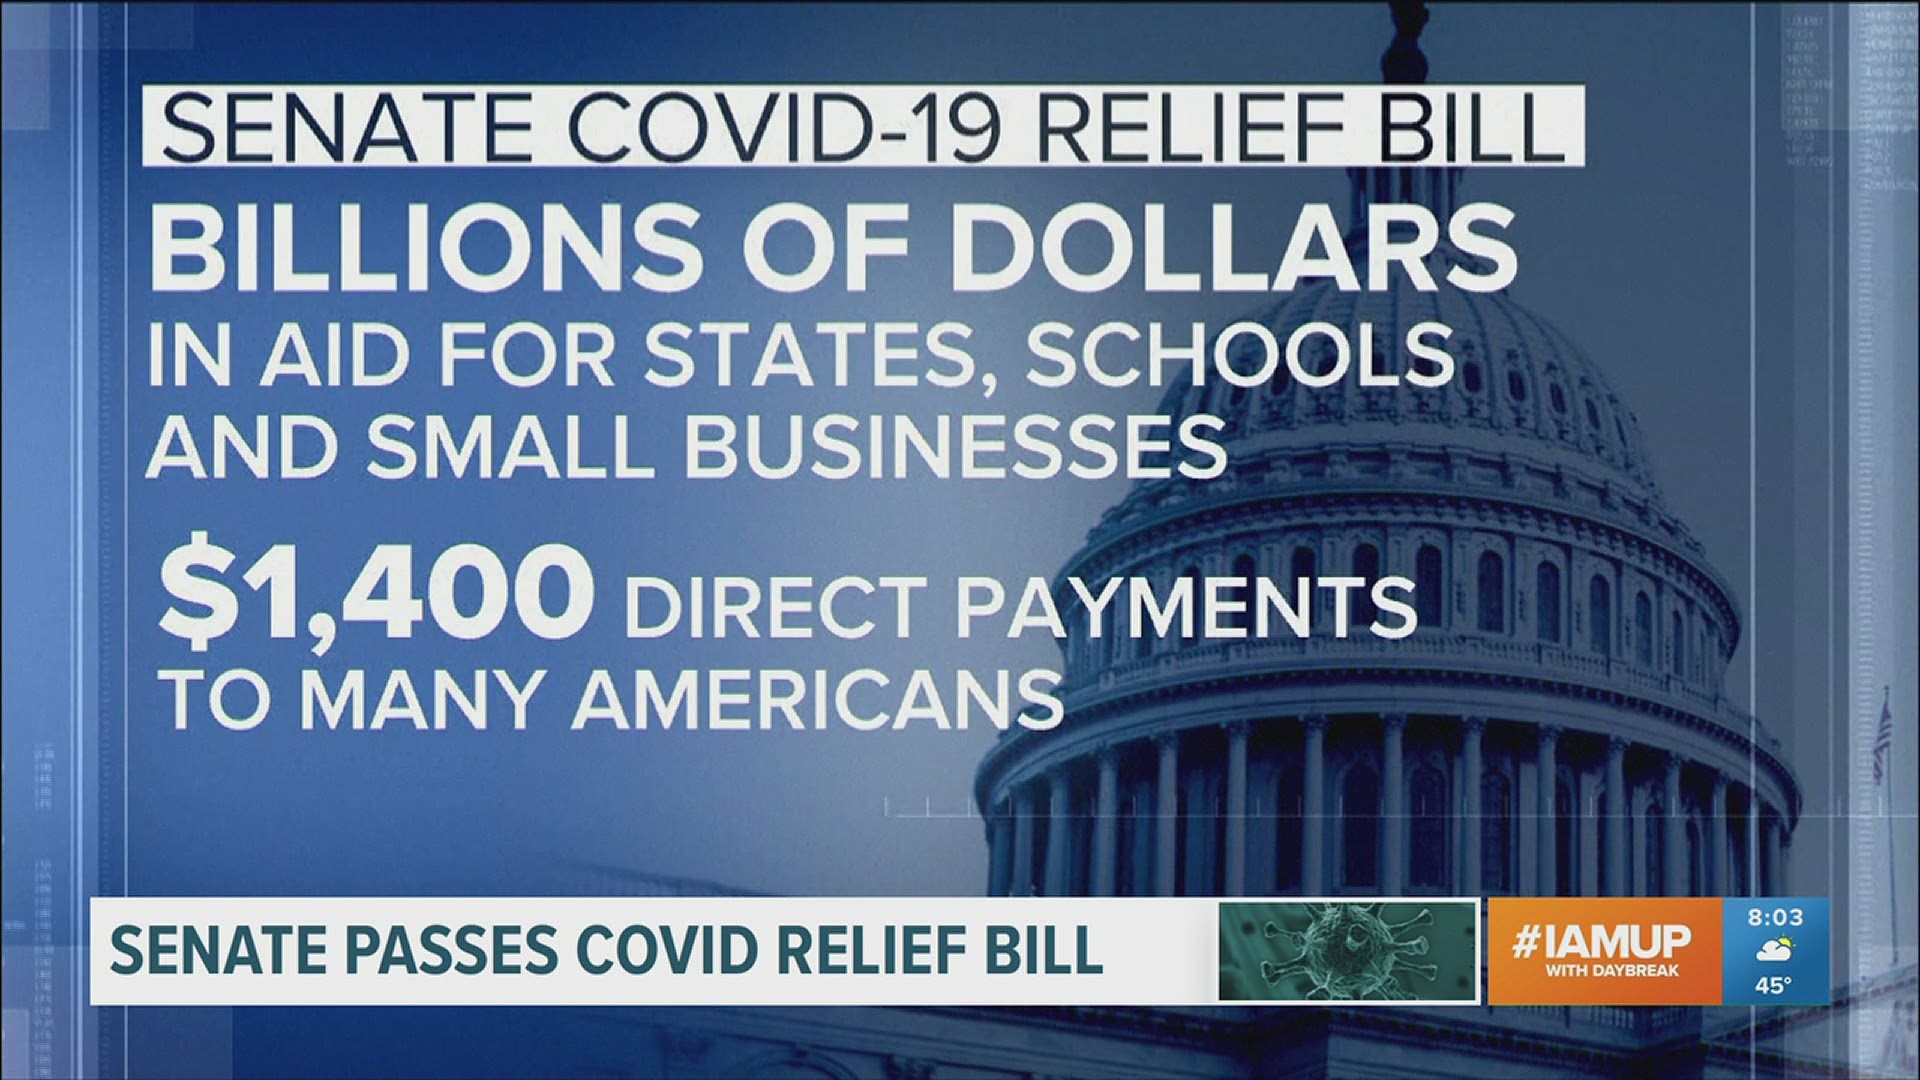 The Senate passed its own version of a massive COVID-19 relief bill, which is now back to the House to pass the revised version.